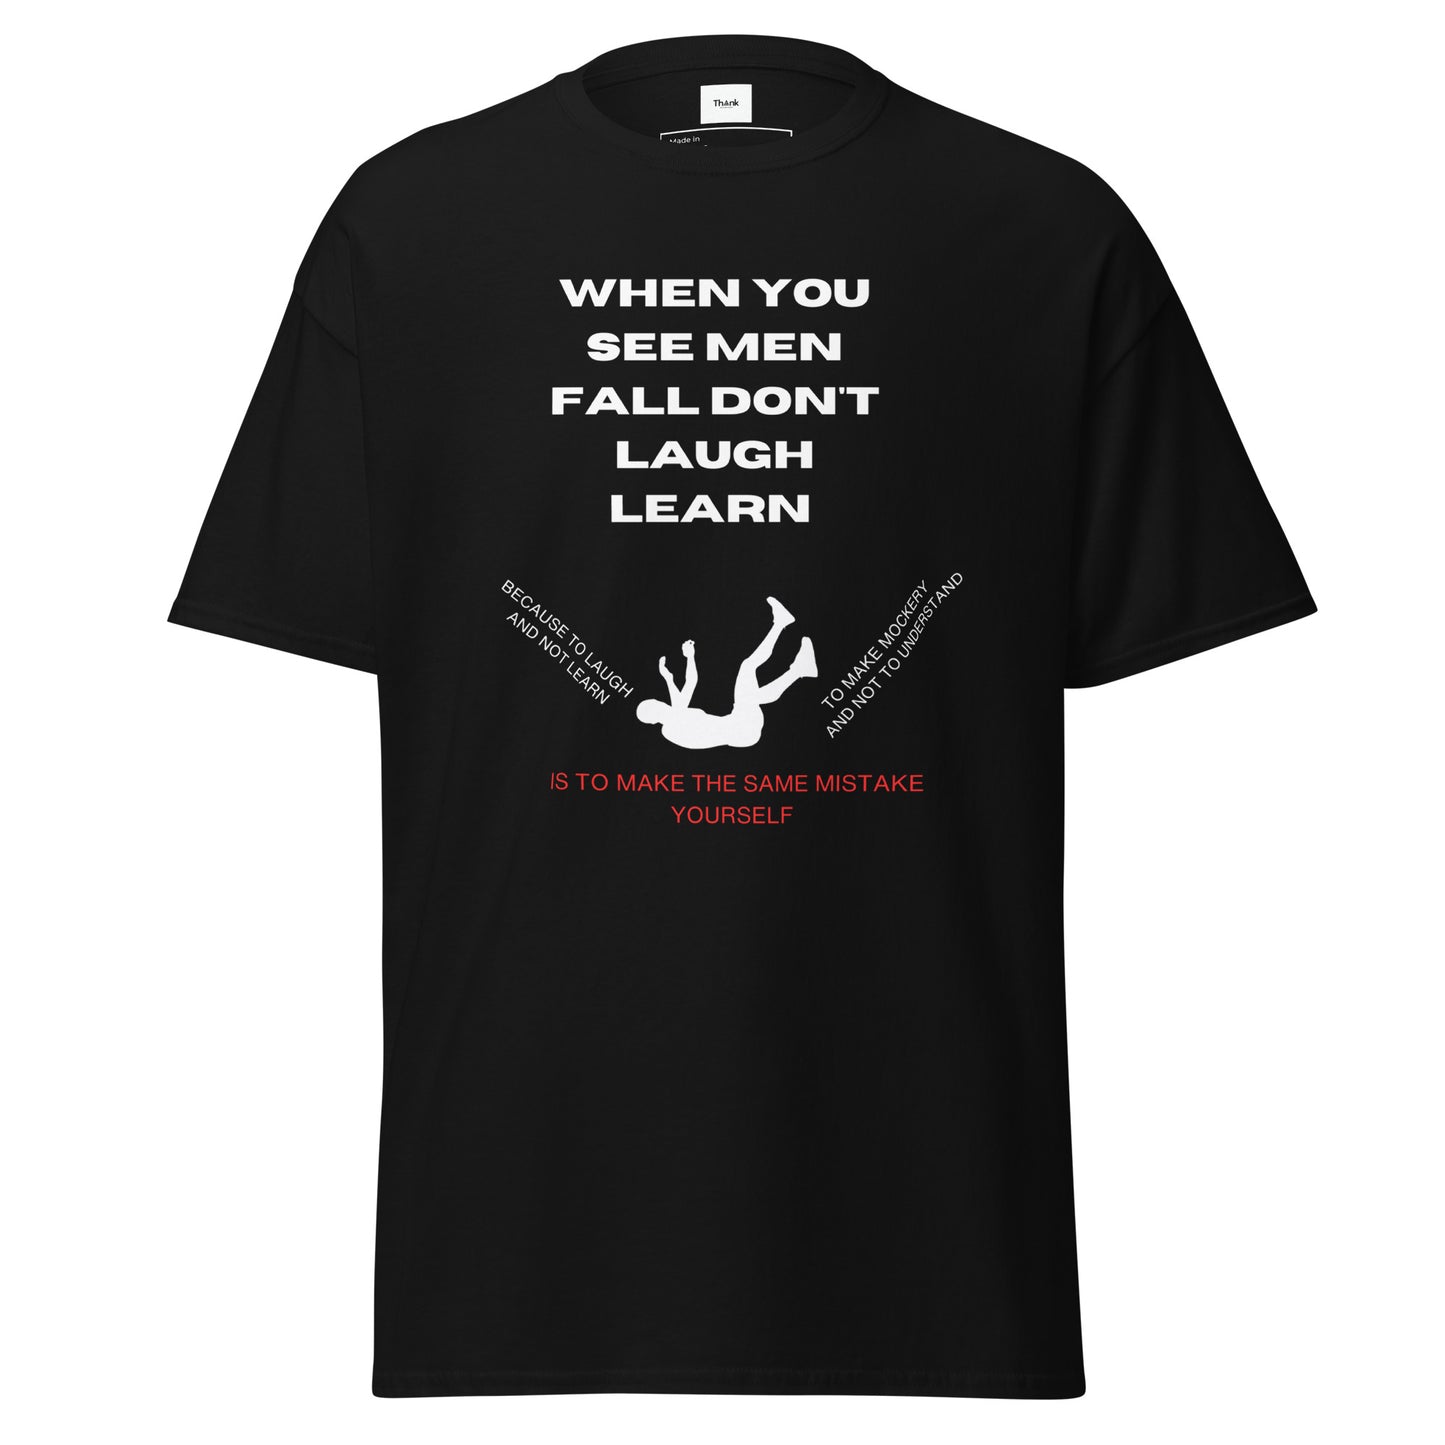 Don't laugh learn  Men's classic tee